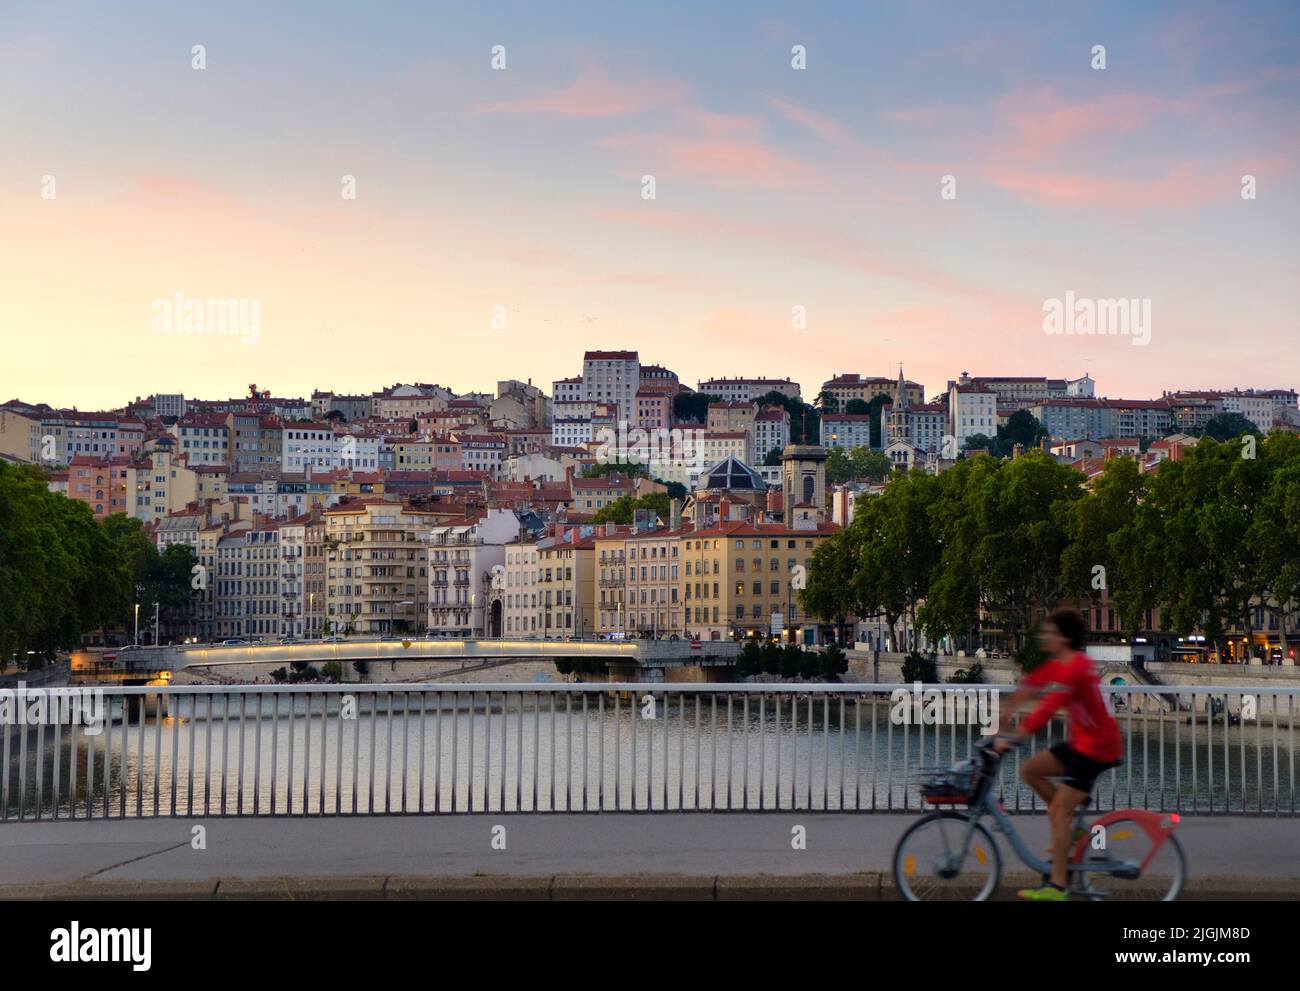 Cyclist and View over Saone River towards Hillside Neighborhood or Croix-Rousse, Lyon, France Stock Photo